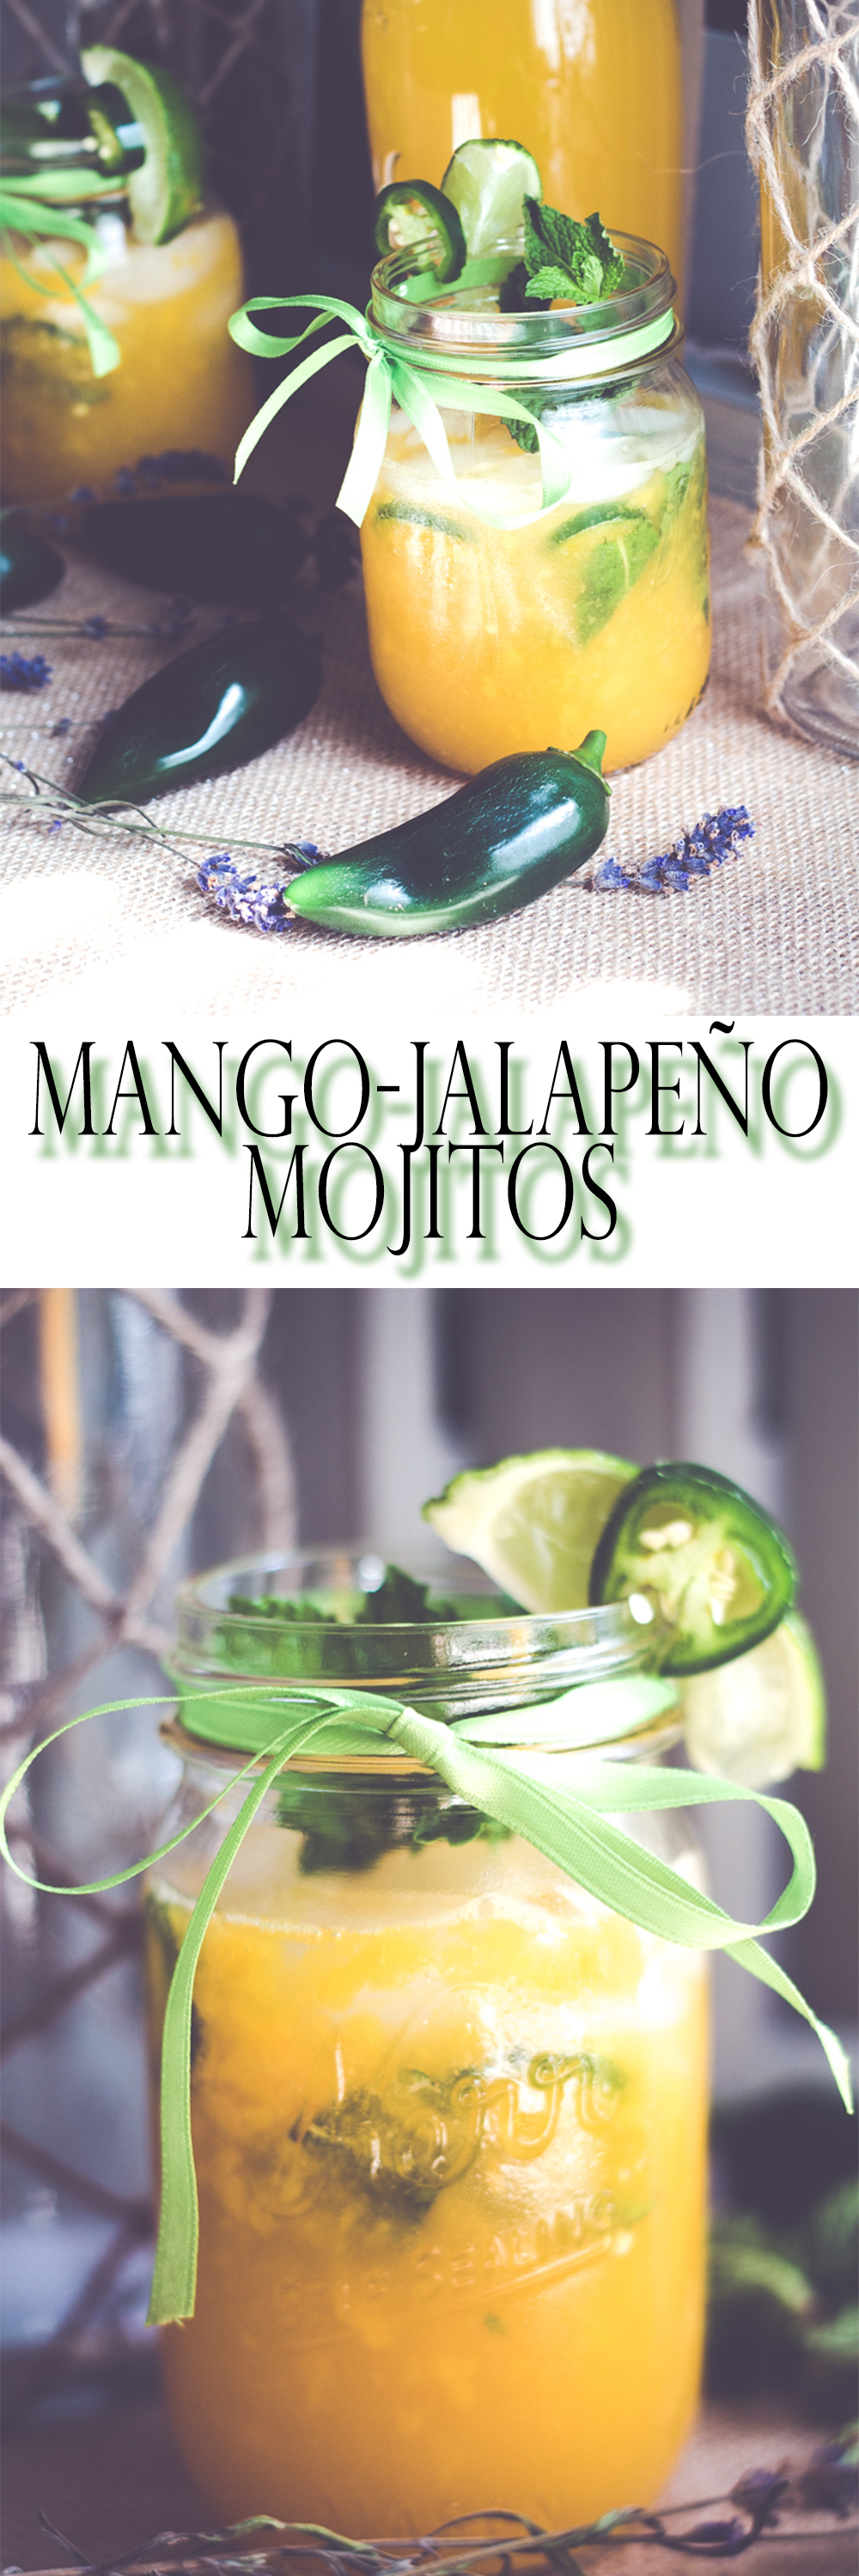 Mango-Jalapeño Mojitos are a great way to start your weekend off right. |BeingMelody.com|@BeingMelody